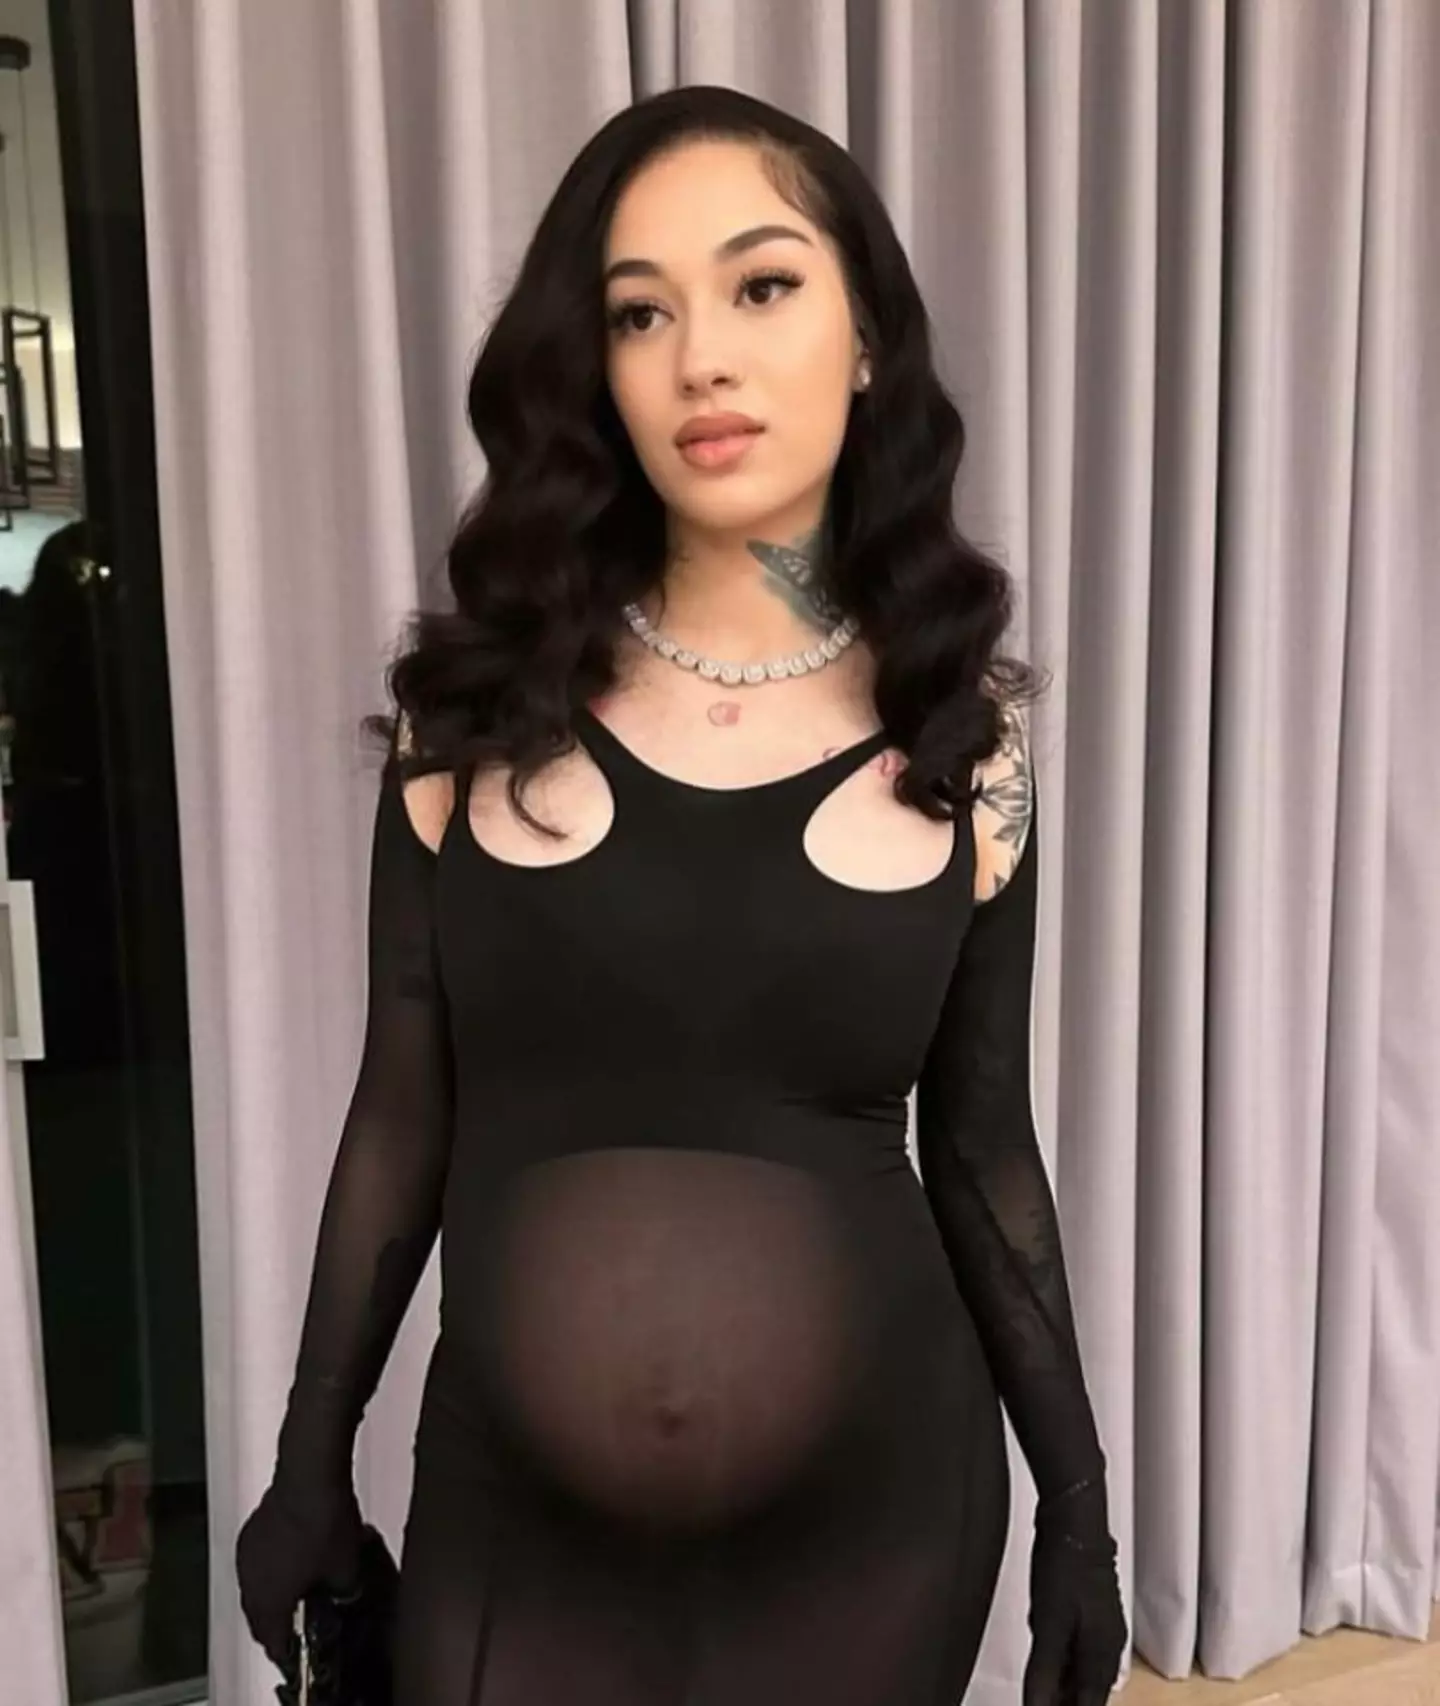 Bhad Bhabie recently gave birth to her first child.